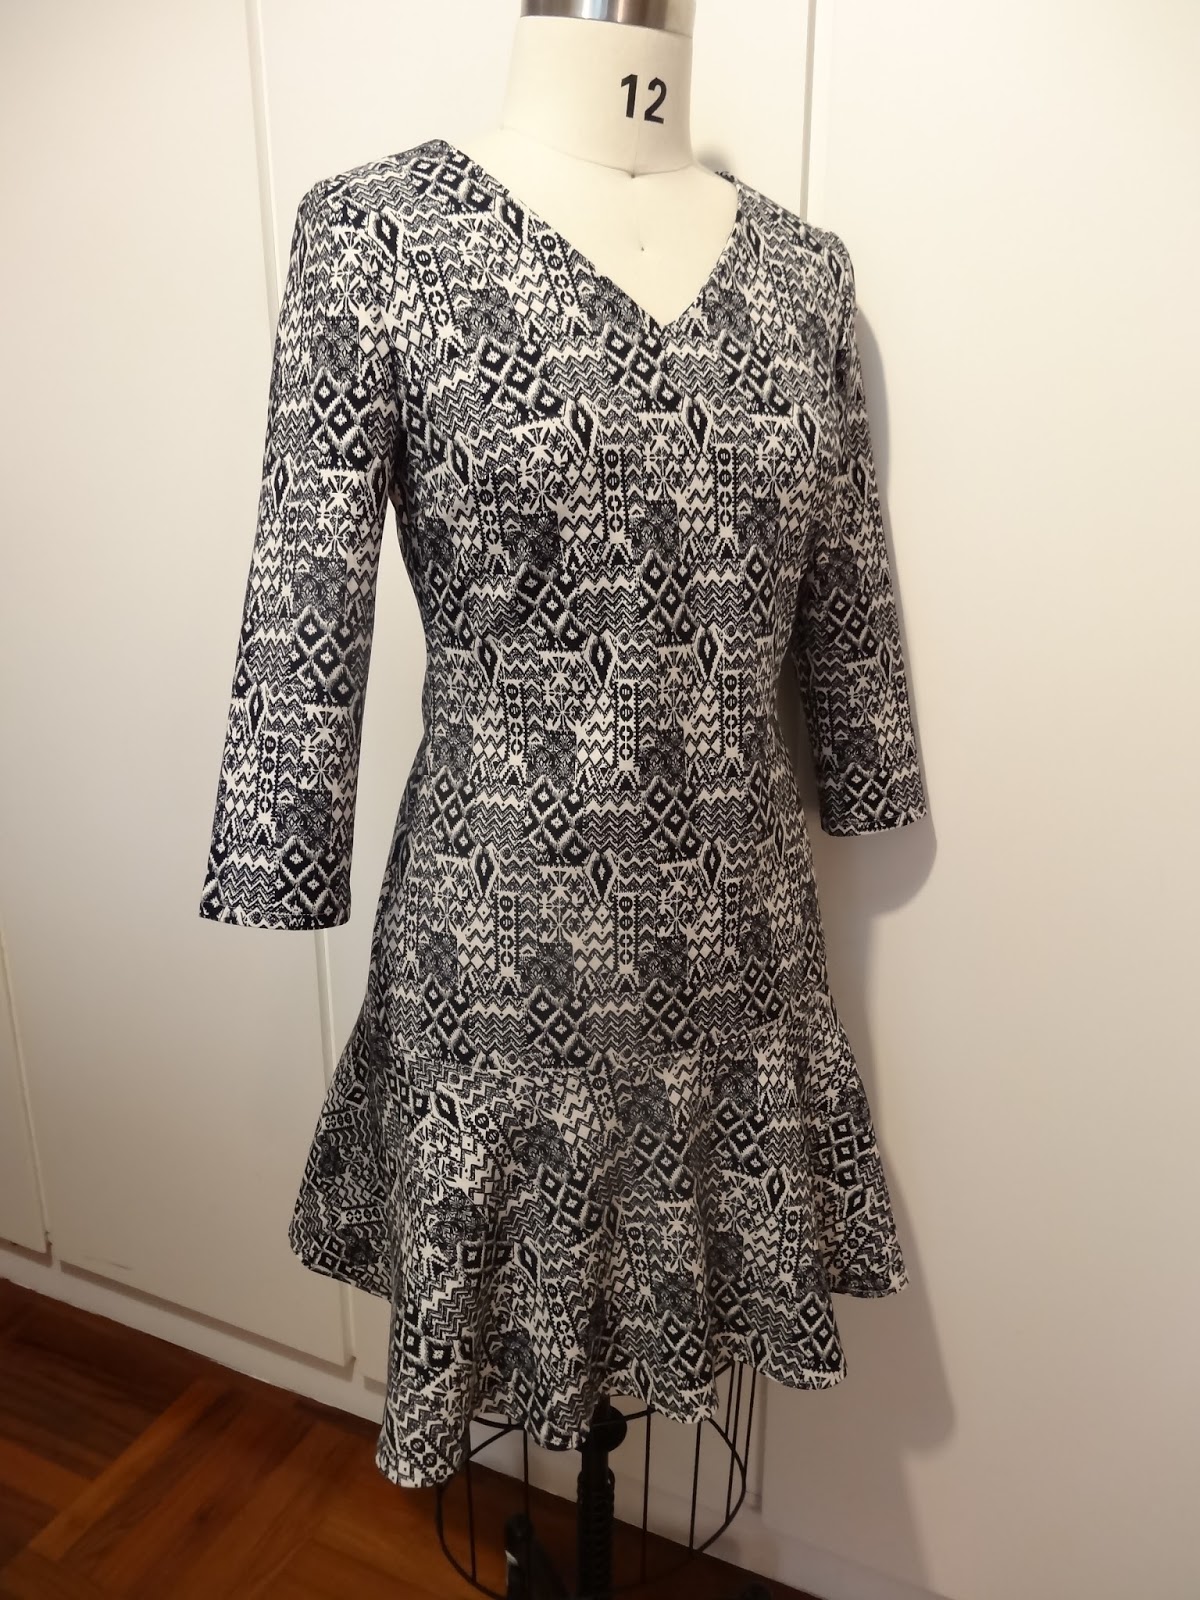 Allison.C Sewing Gallery: McCall's 7244 Dress (Plenty by Tracy Reese)